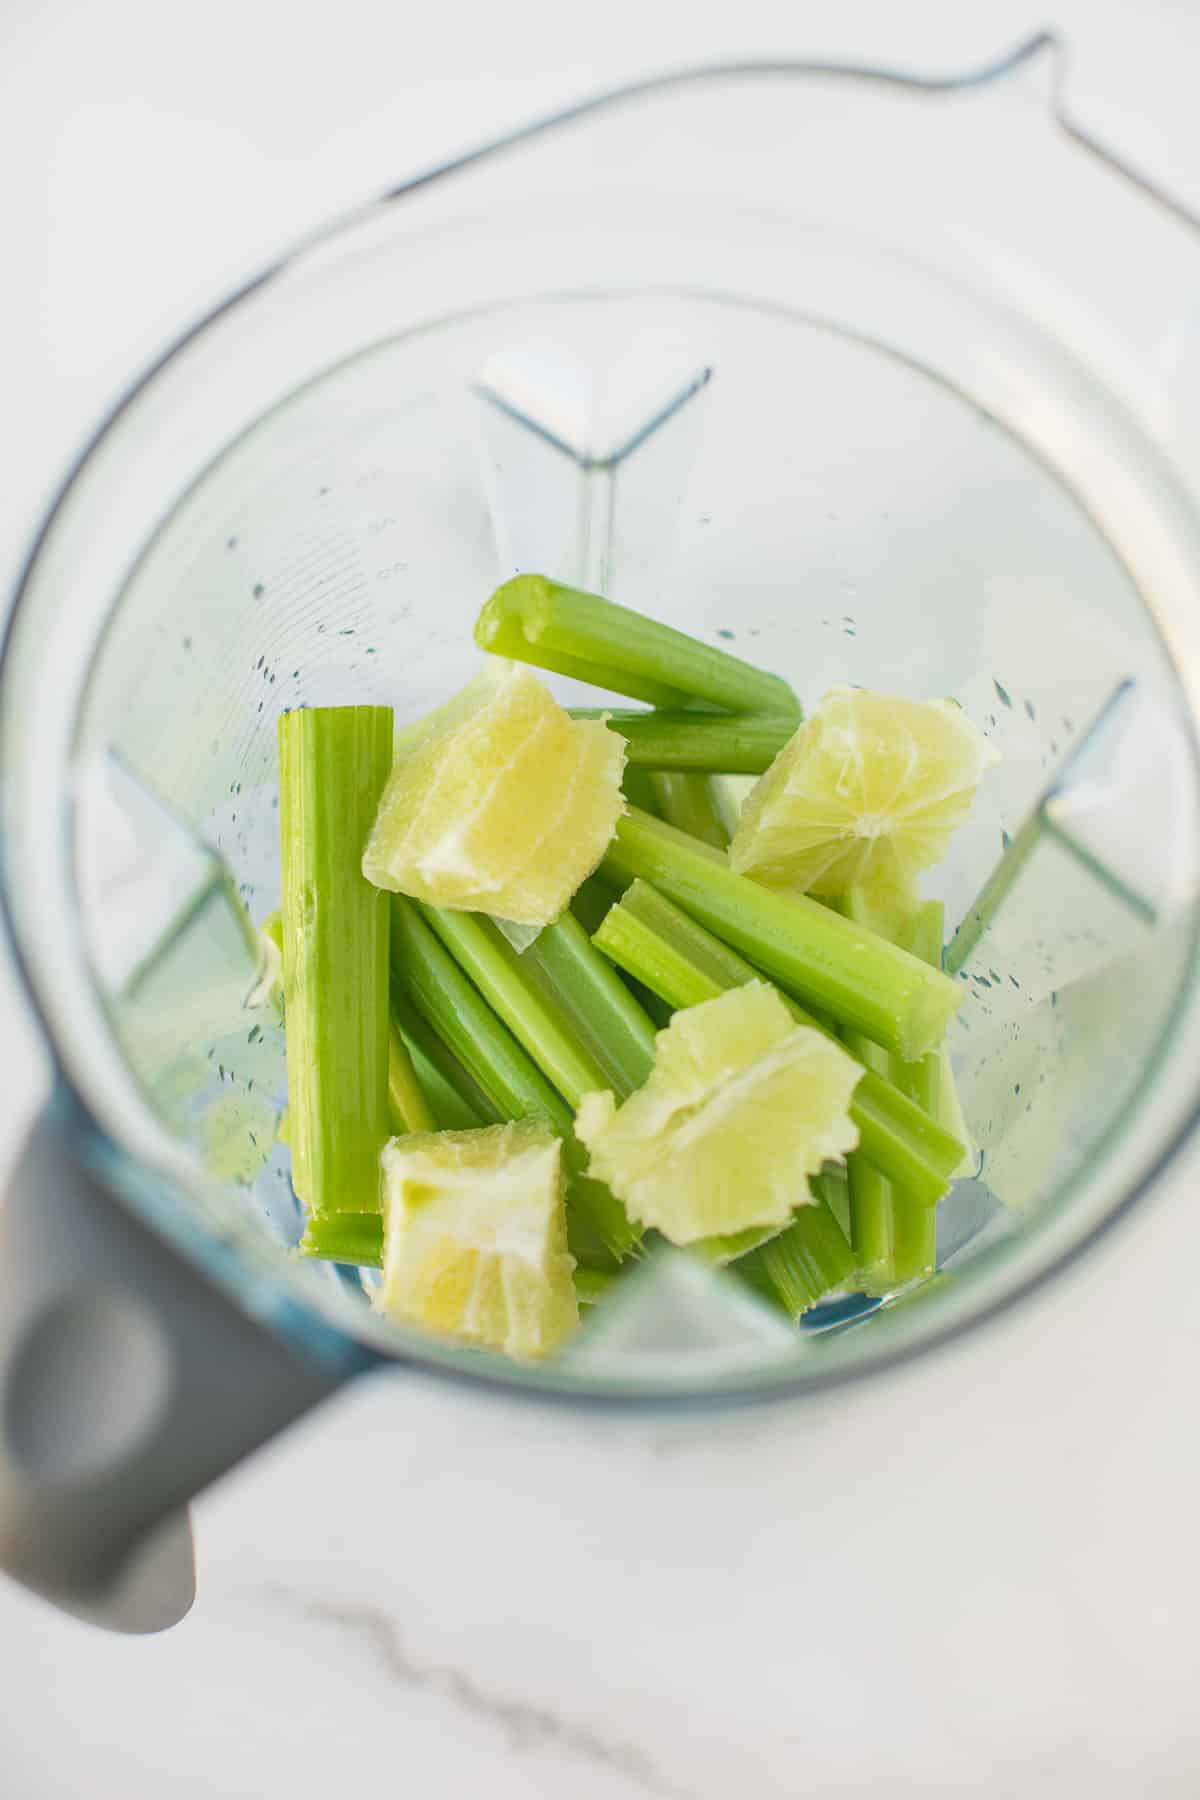 celery stalks and peeled limes in the base of a vitamix